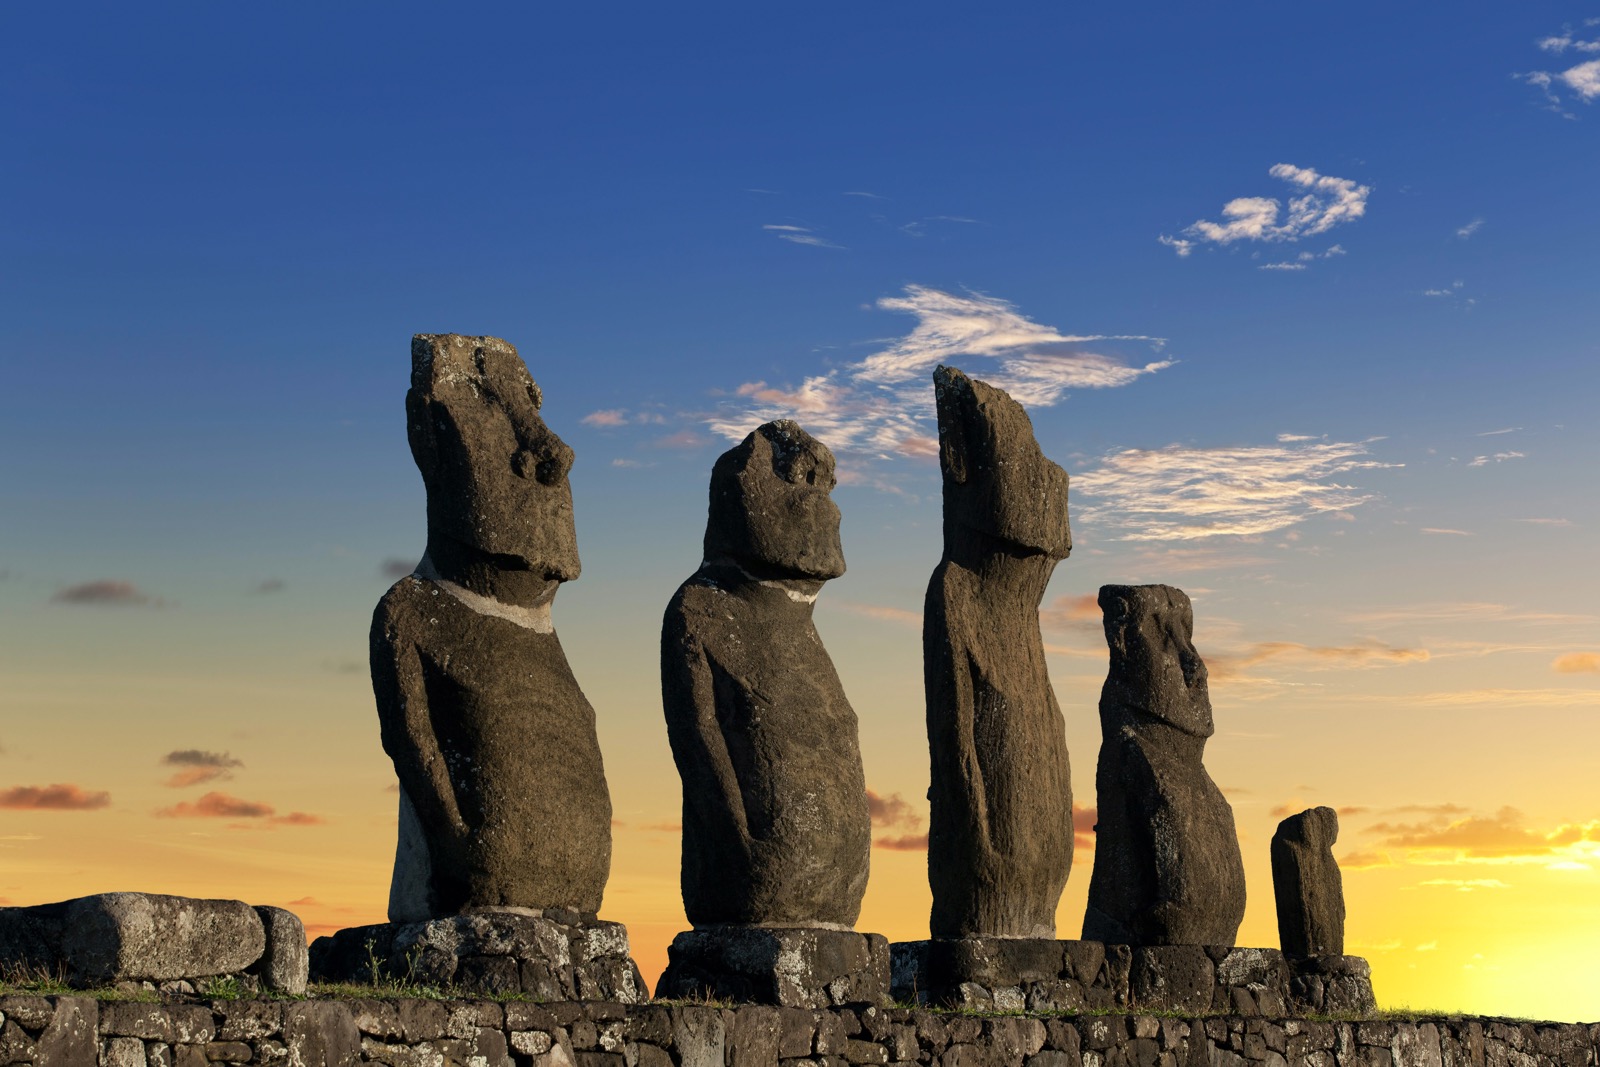 🗽 Can You Match These Famous Statues to Their Locations? Moai statues, Easter Island